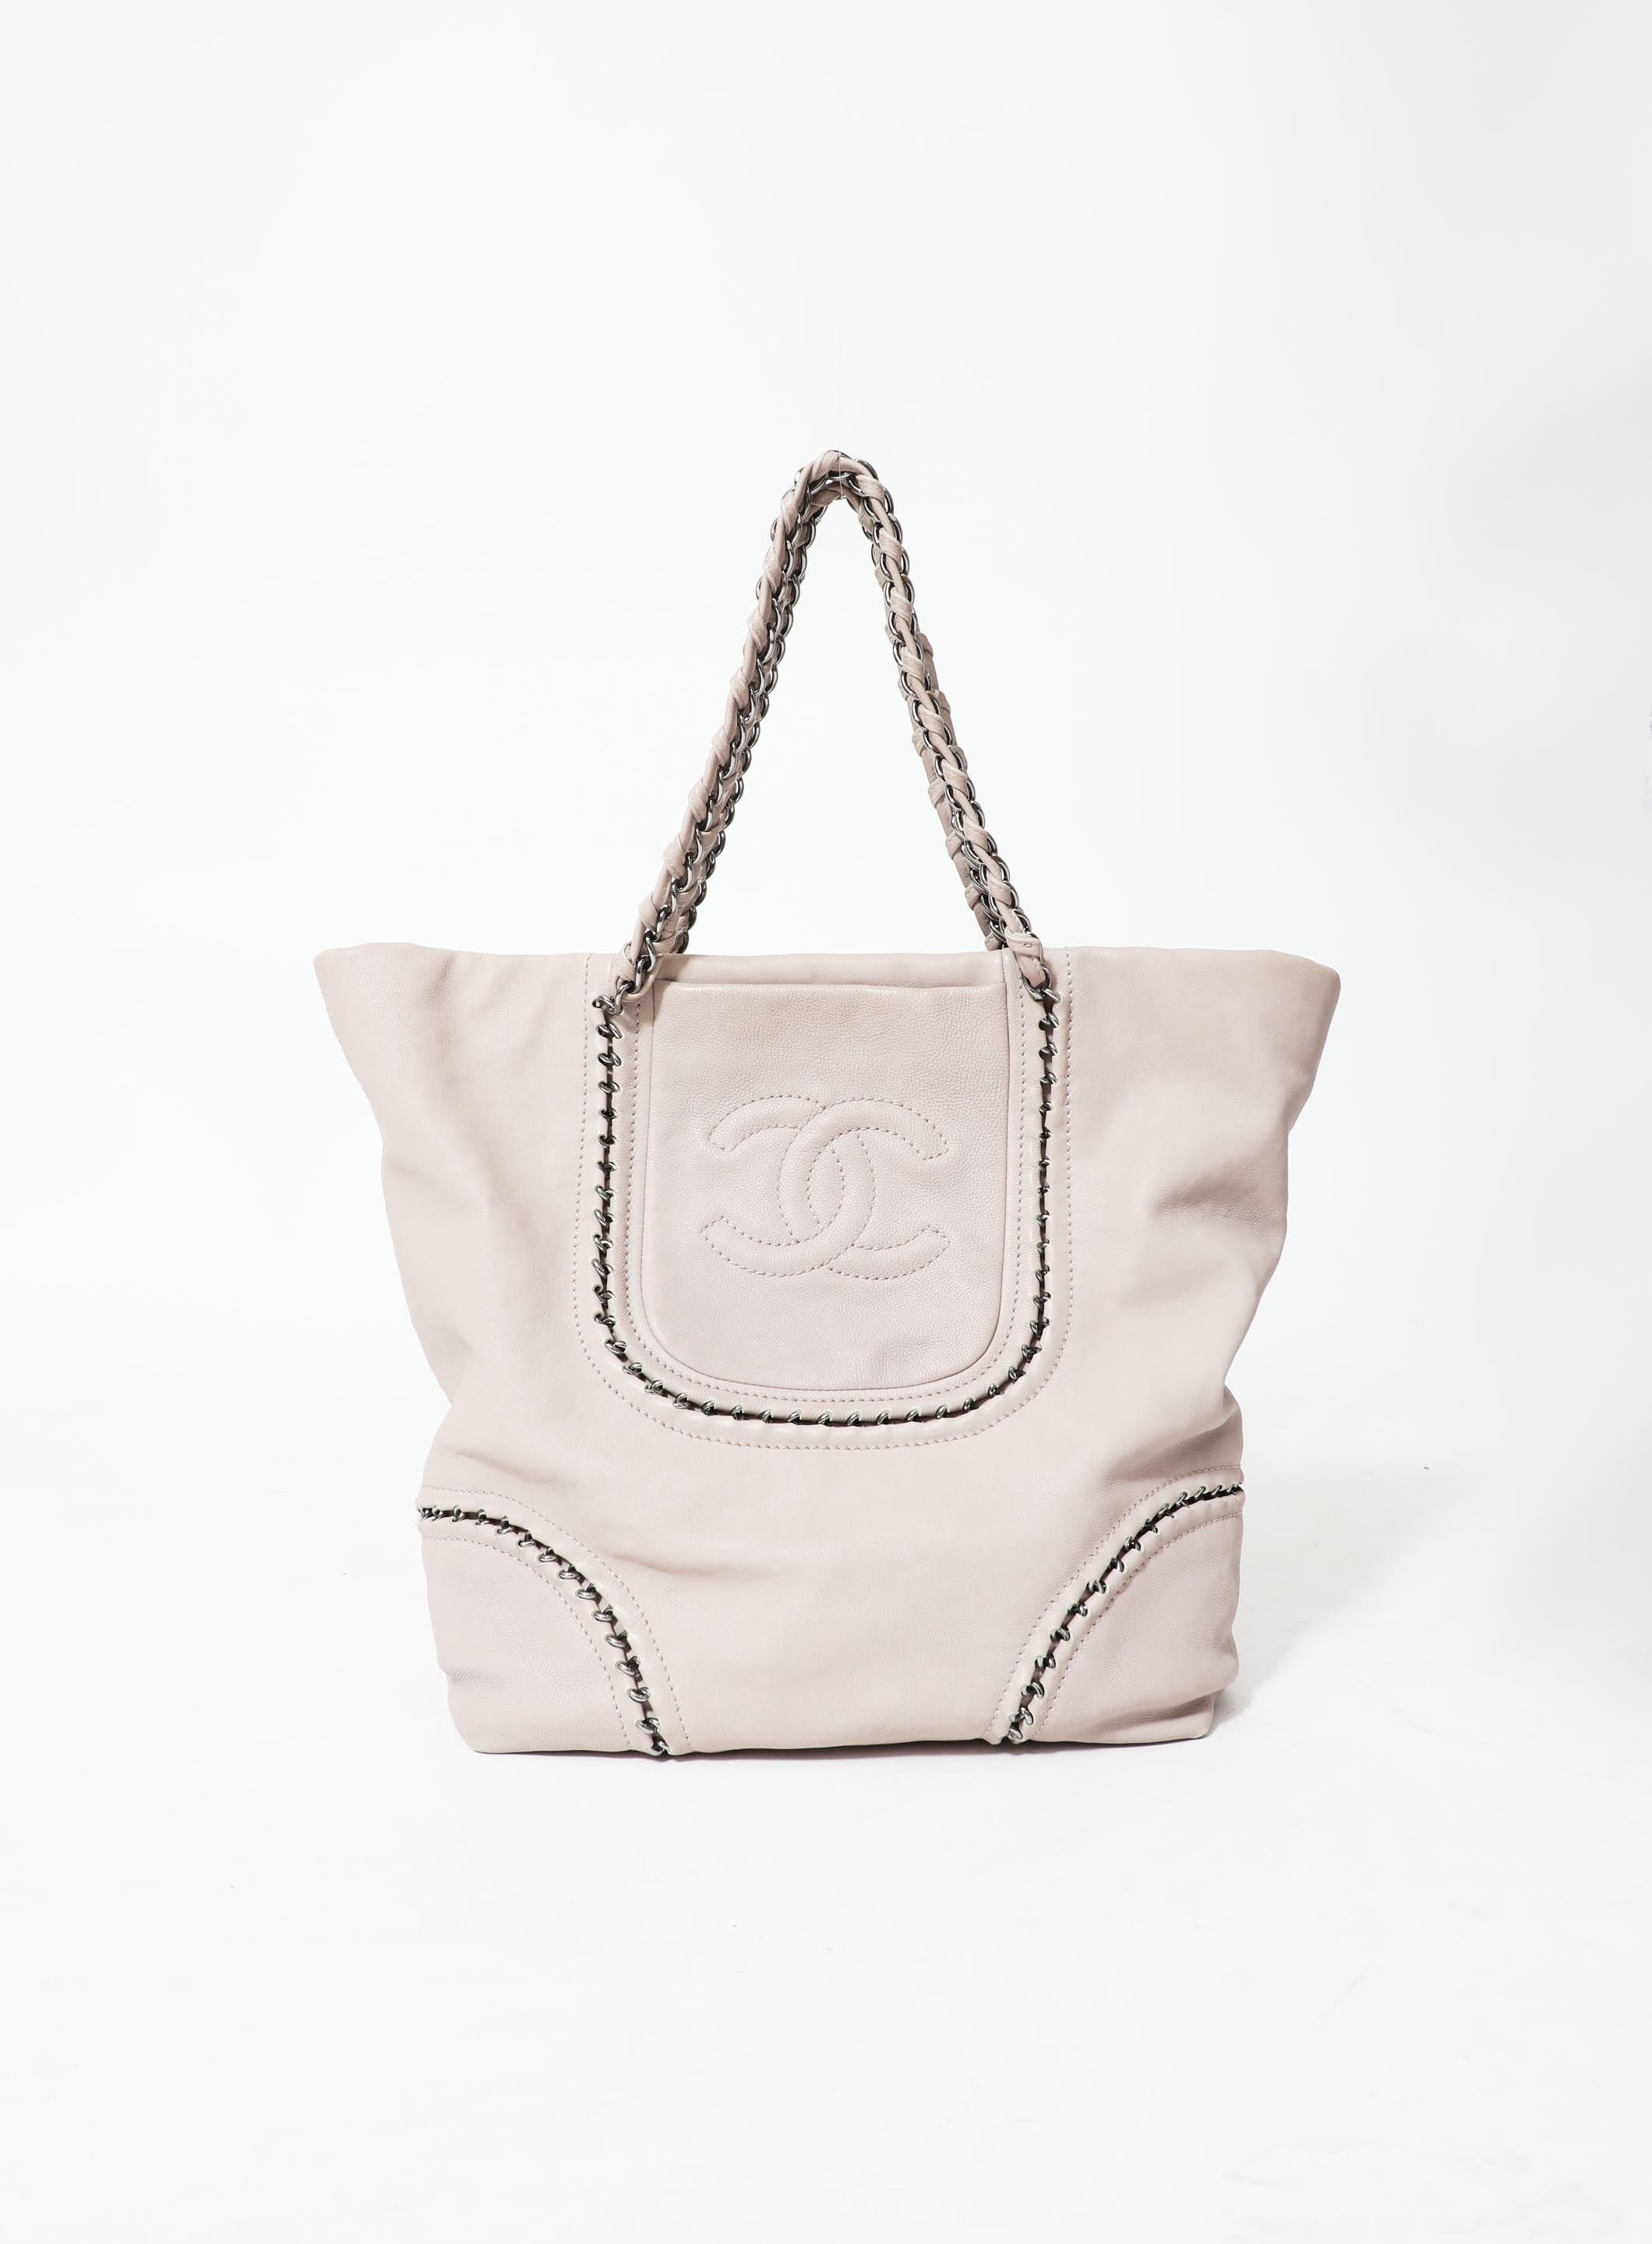 Modern Chain 'CC' Tote, Authentic & Vintage